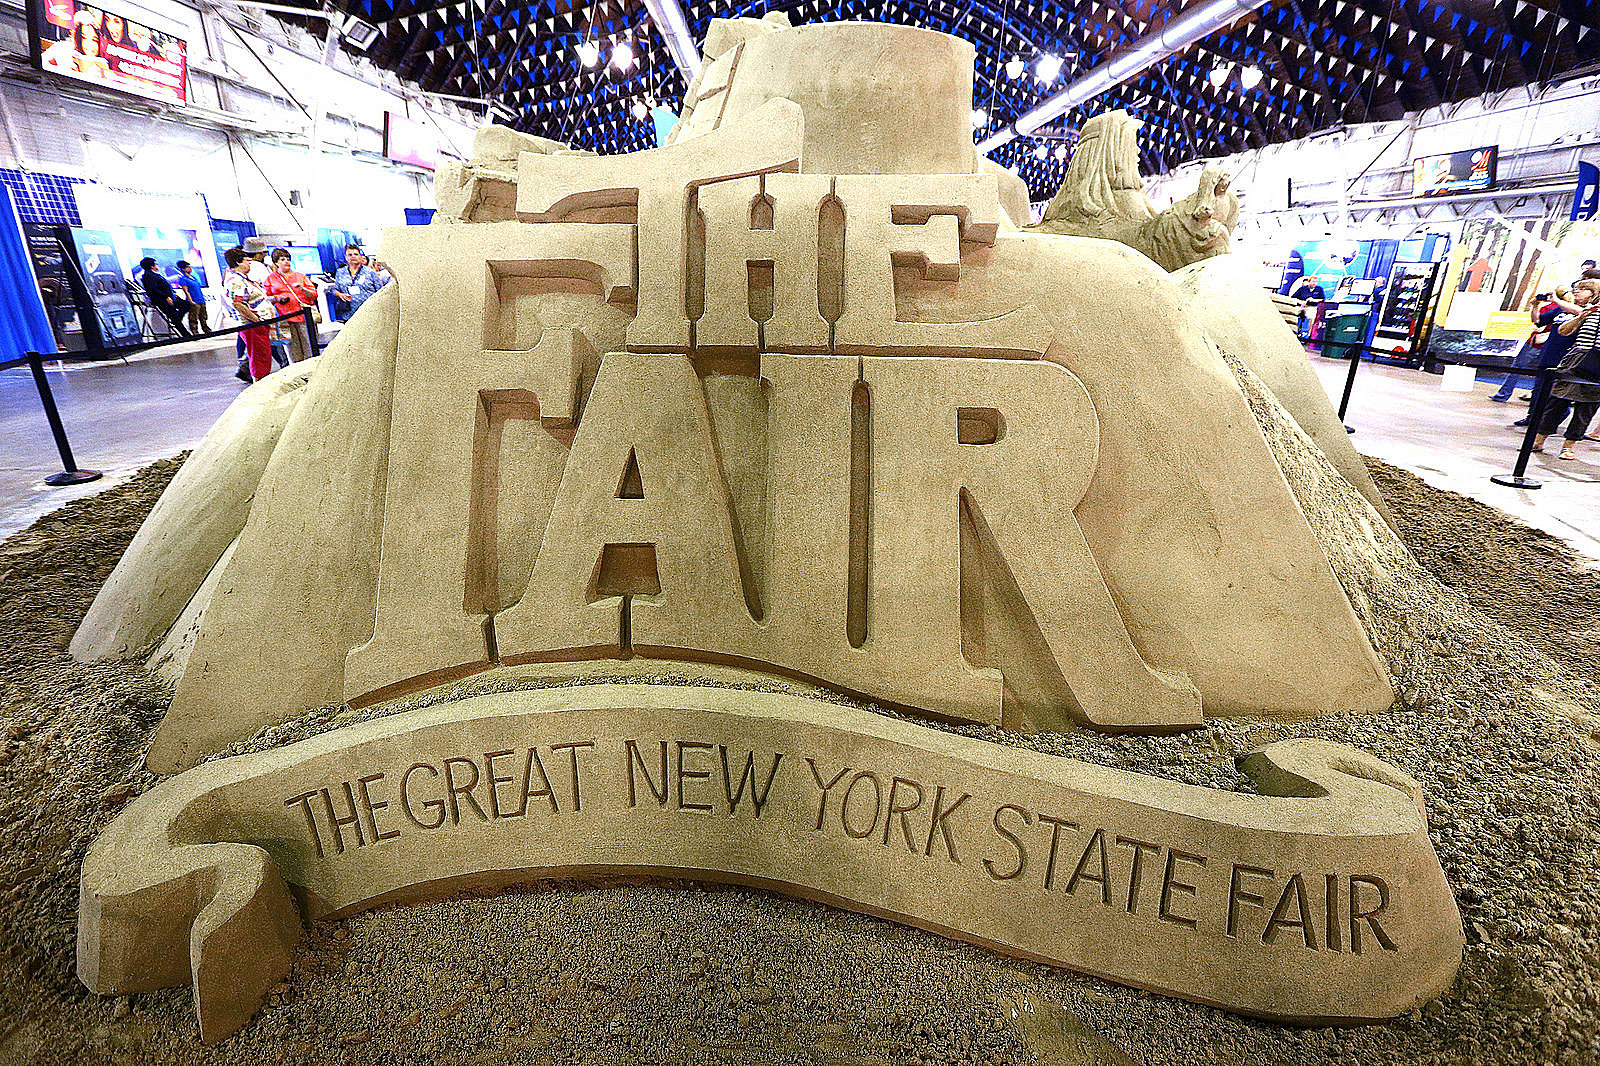 New York State Fair Theme to be Decided By — YOU